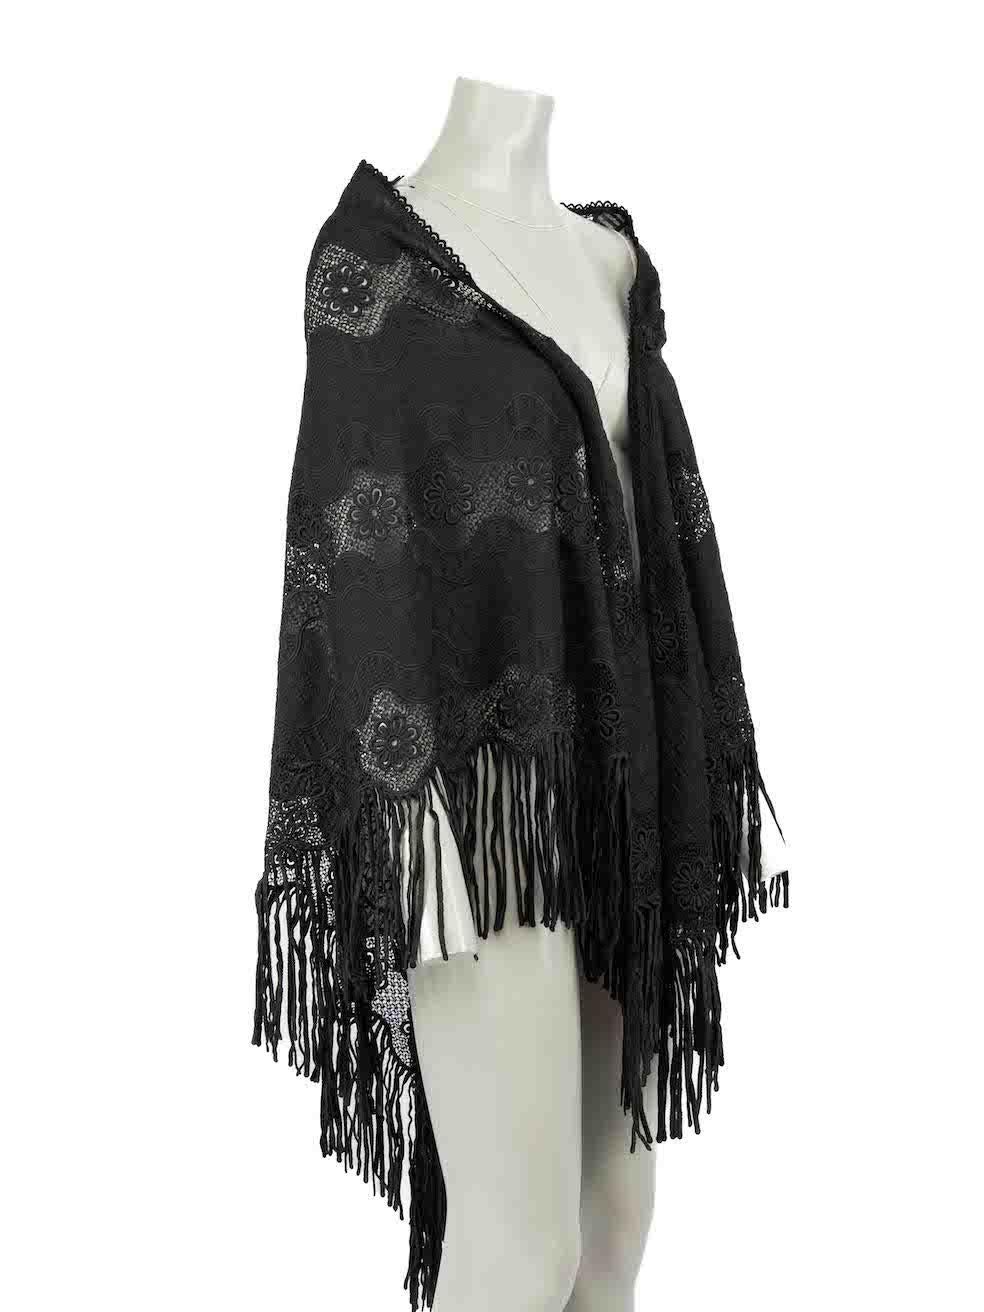 CONDITION is Never worn. No visible wear to shawl is evident on this new Miguelina designer resale item.
 
 Details
 Black
 Cotton
 Scarf
 Floral lace pattern
 Tassel edge
 
 
 Made in USA
 
 Composition
 80% Cotton and 20% Polyester
 
 Care